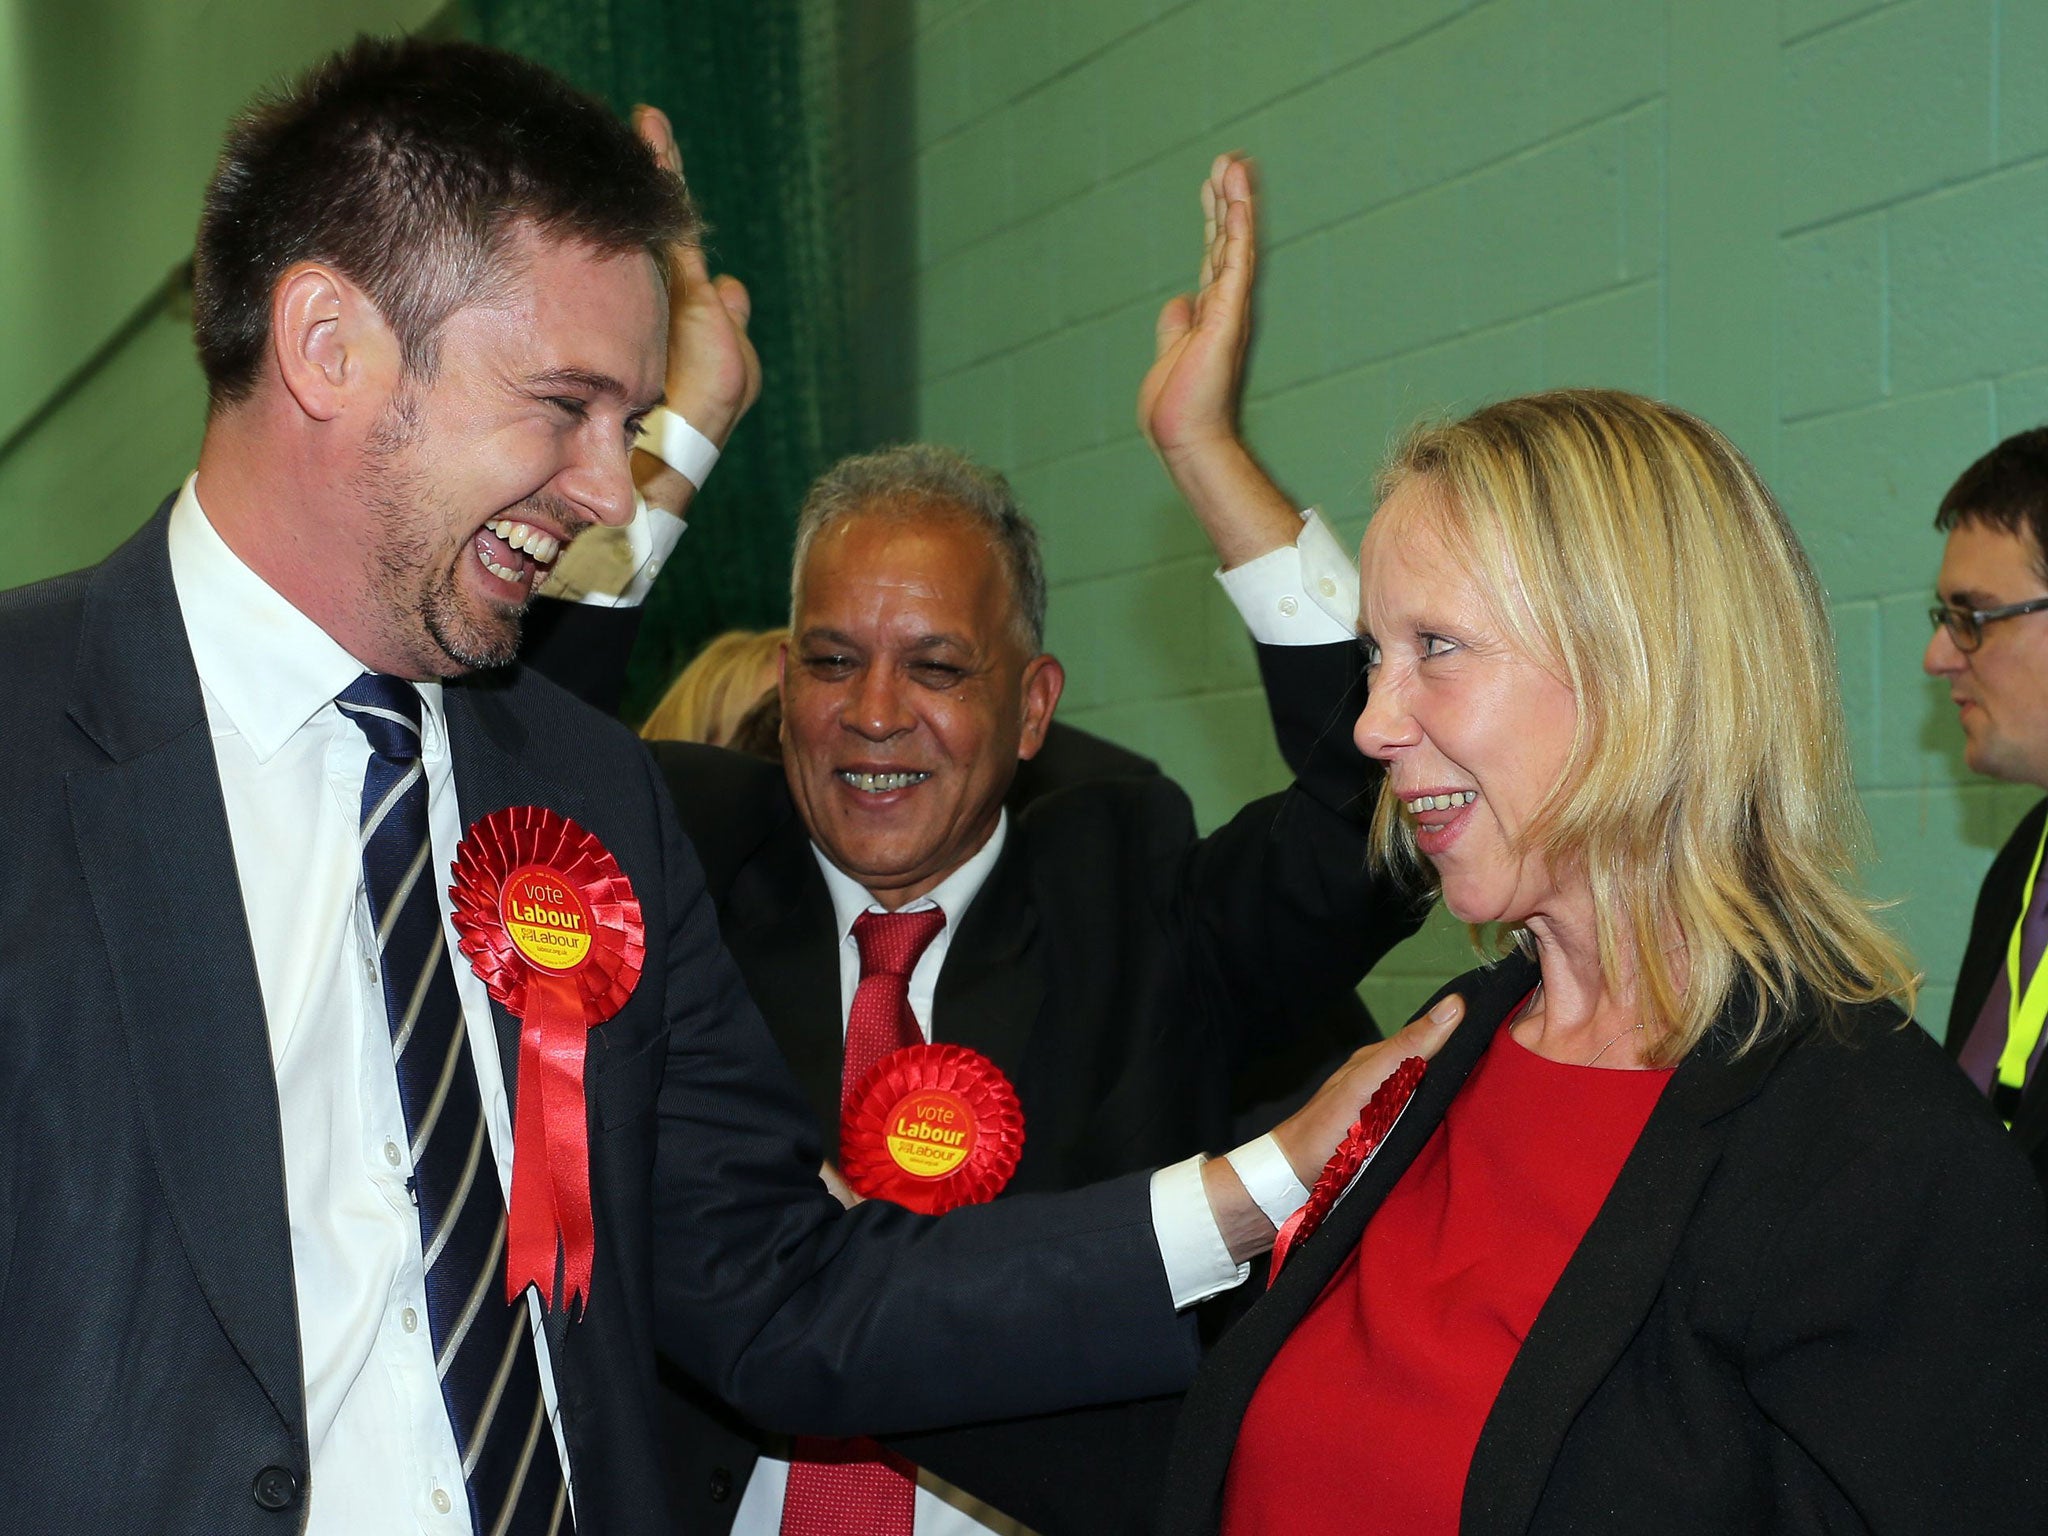 Labour's Liz Mcinnes celebrates her narrow victory in the Heywood and Middleton by-election